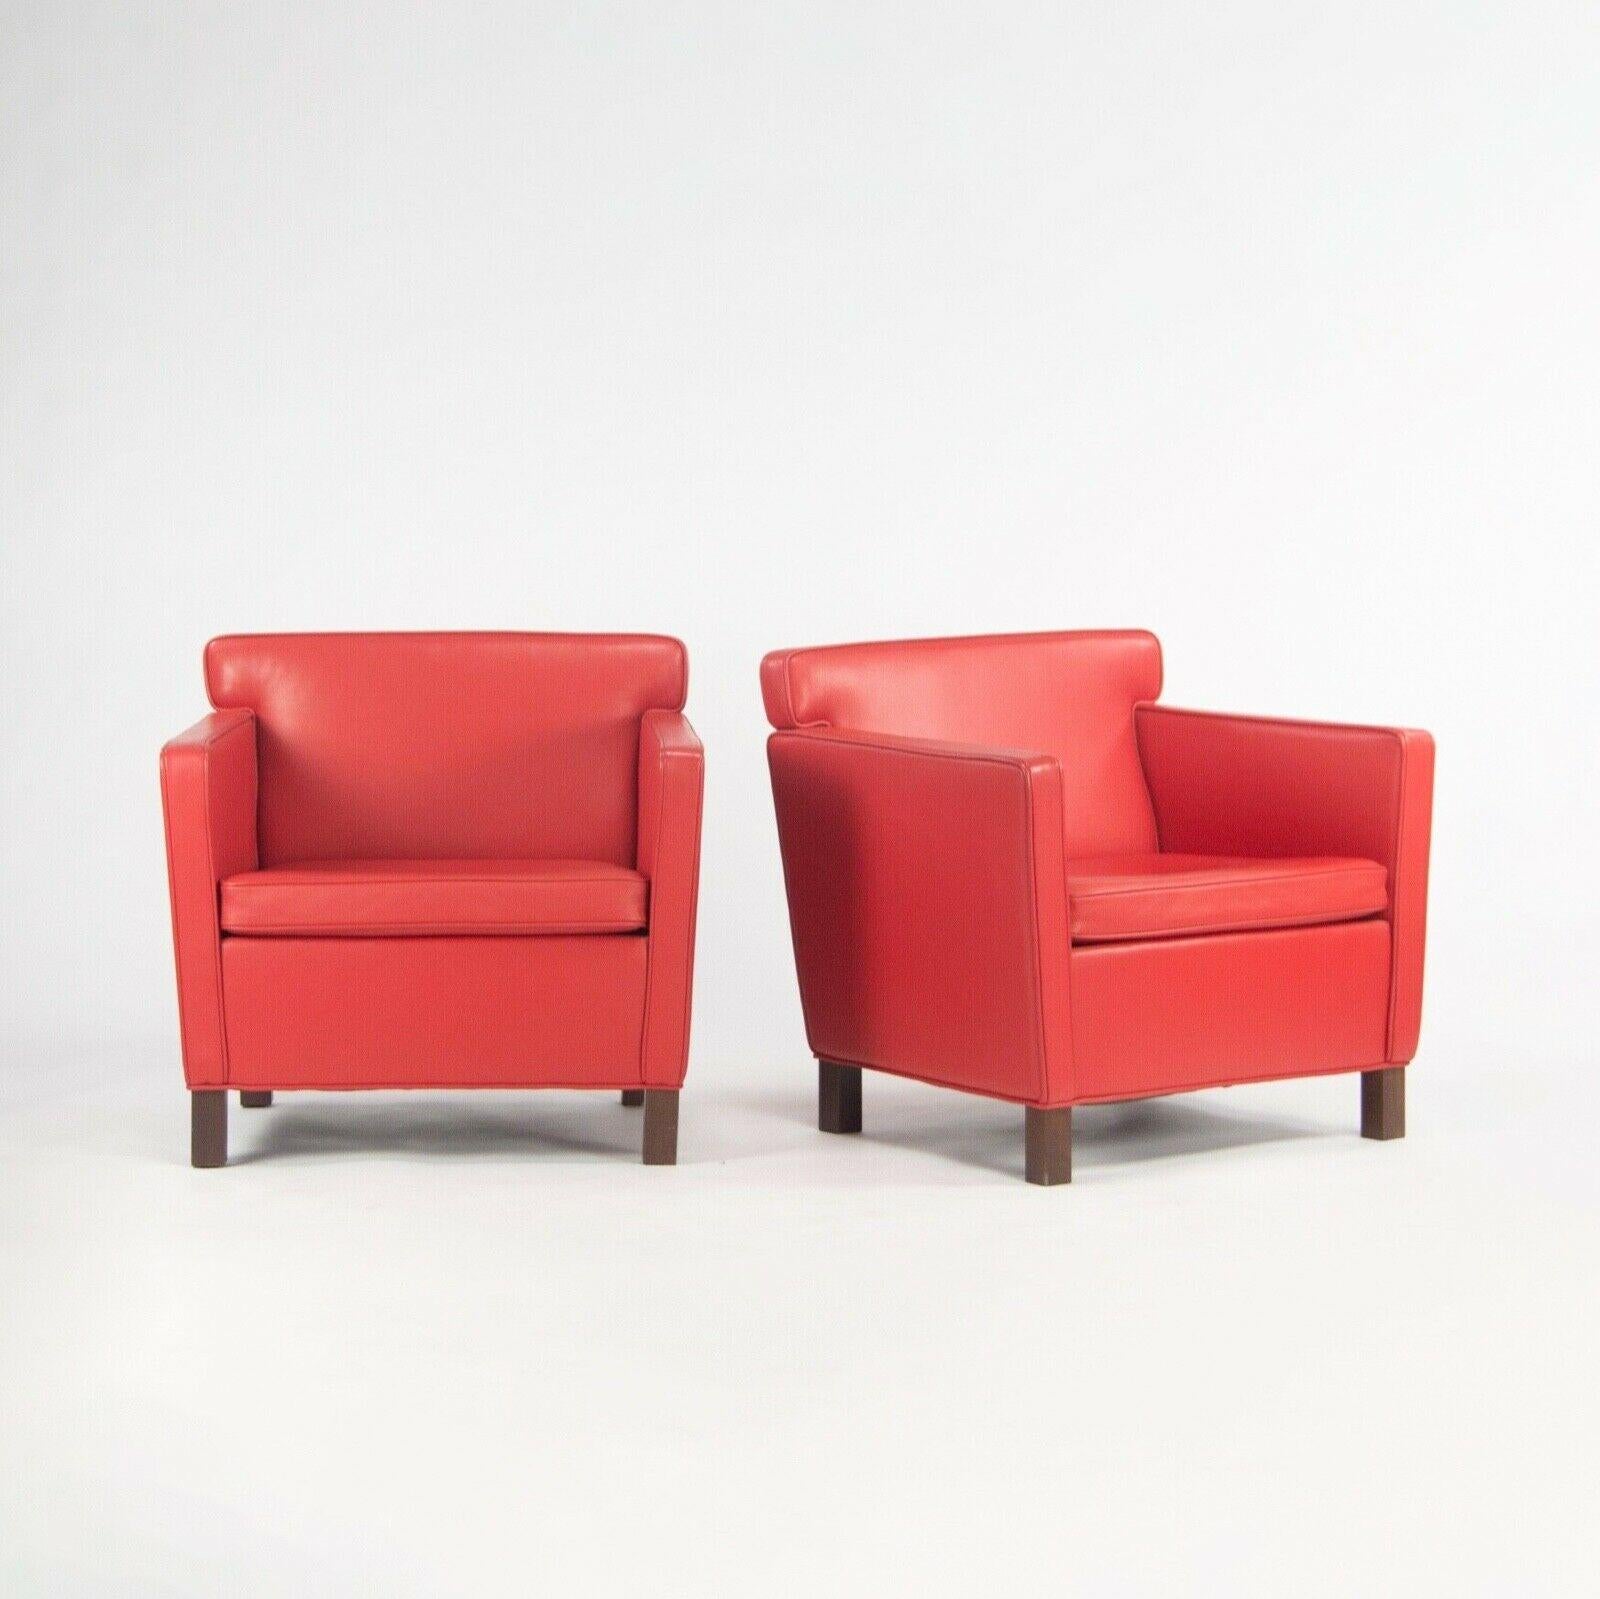 Listed for sale is a pair of Krefeld Lounge Chairs produced by Knoll and designed by Mies Van Der Rohe. These chairs were specified in red leather and also feature dark walnut legs. The condition is excellent with some minor wear from use to the